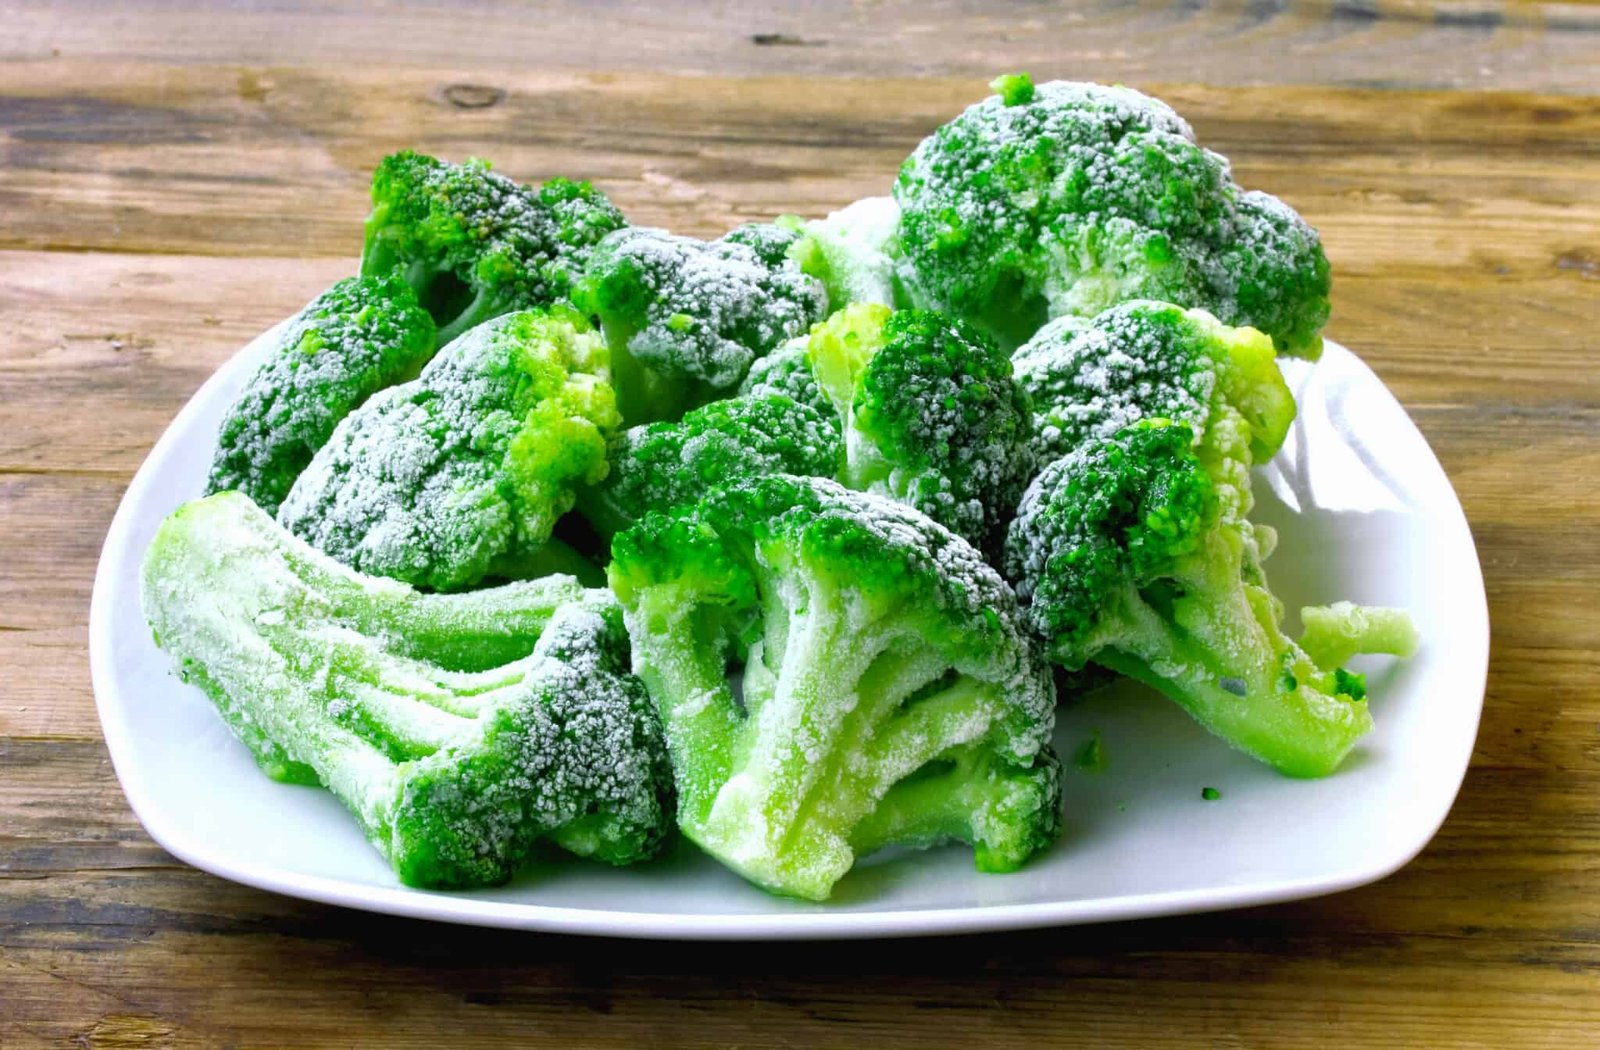 How do you Defrost Frozen Broccoli Quickly?